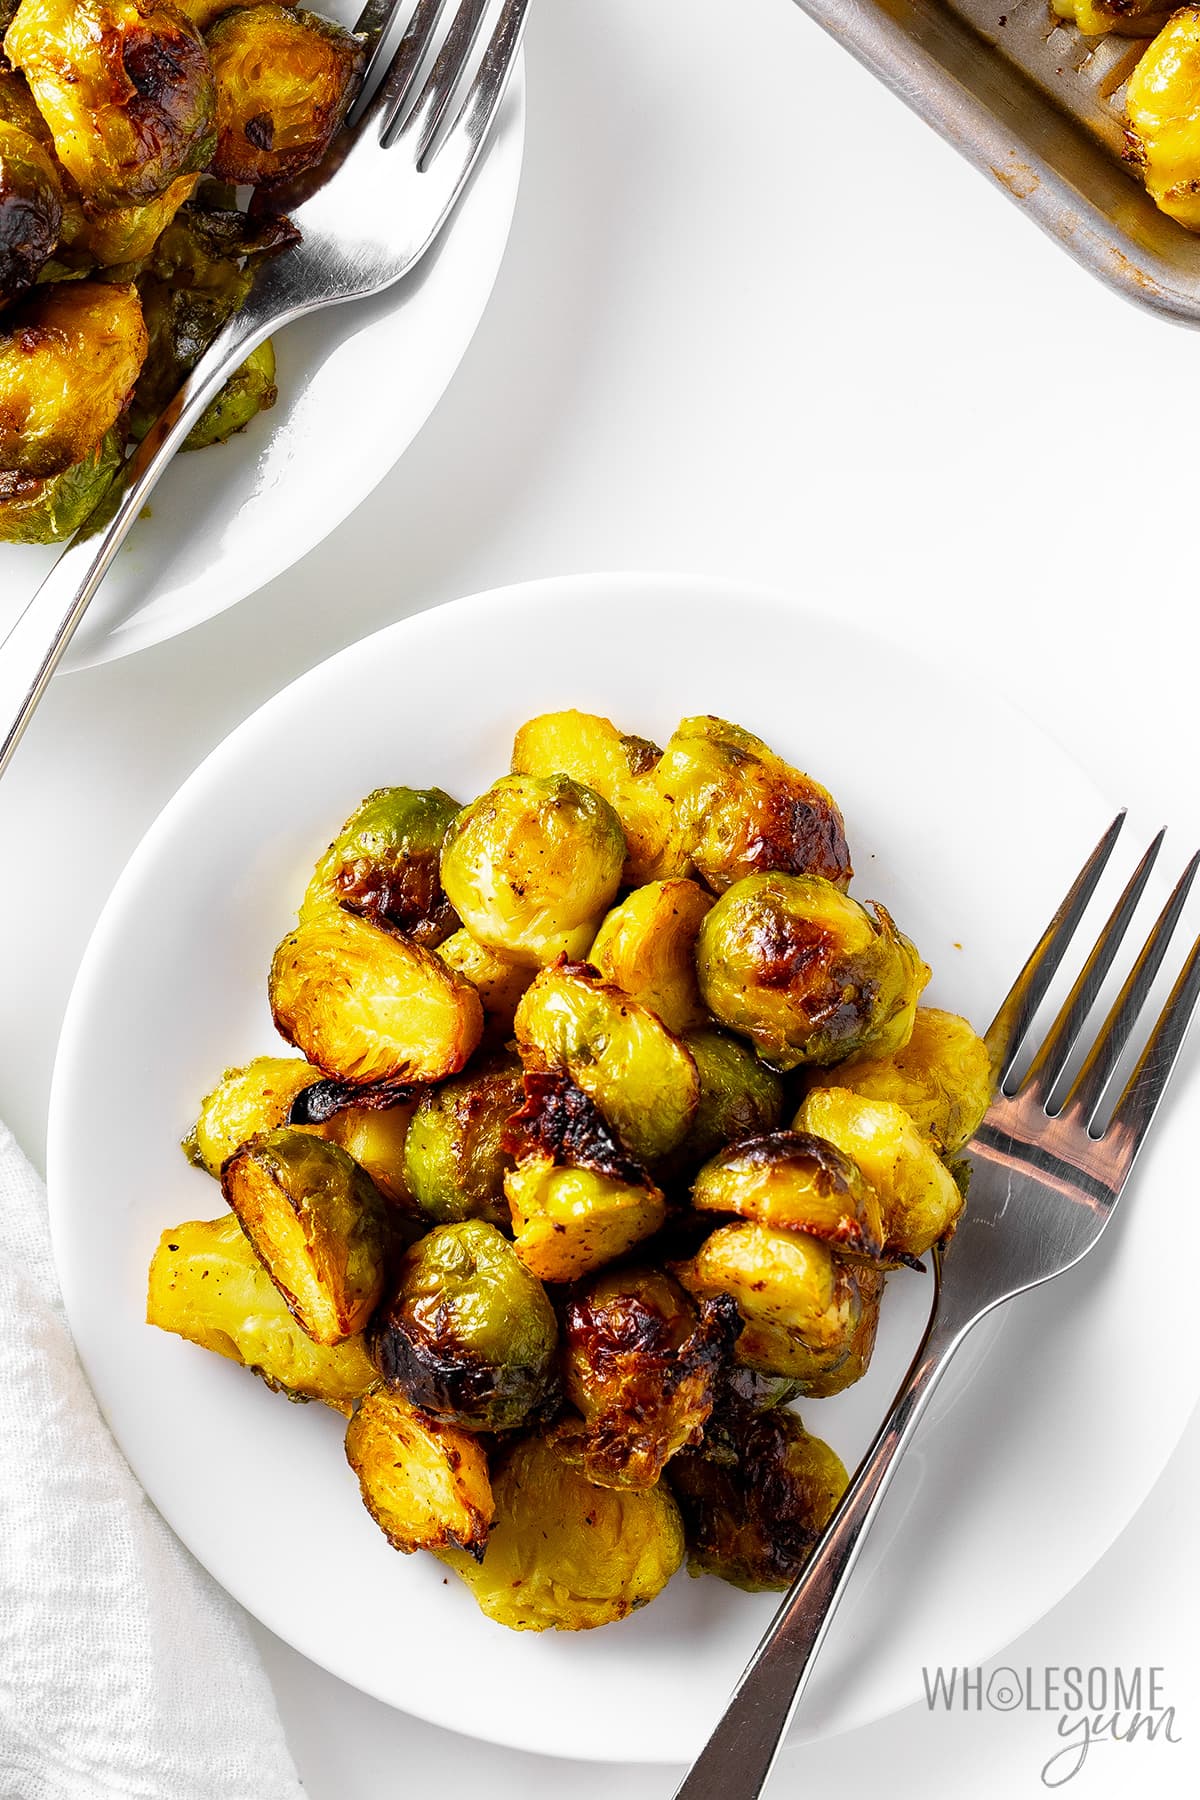 Roasted brussels sprouts on two plates with forks.